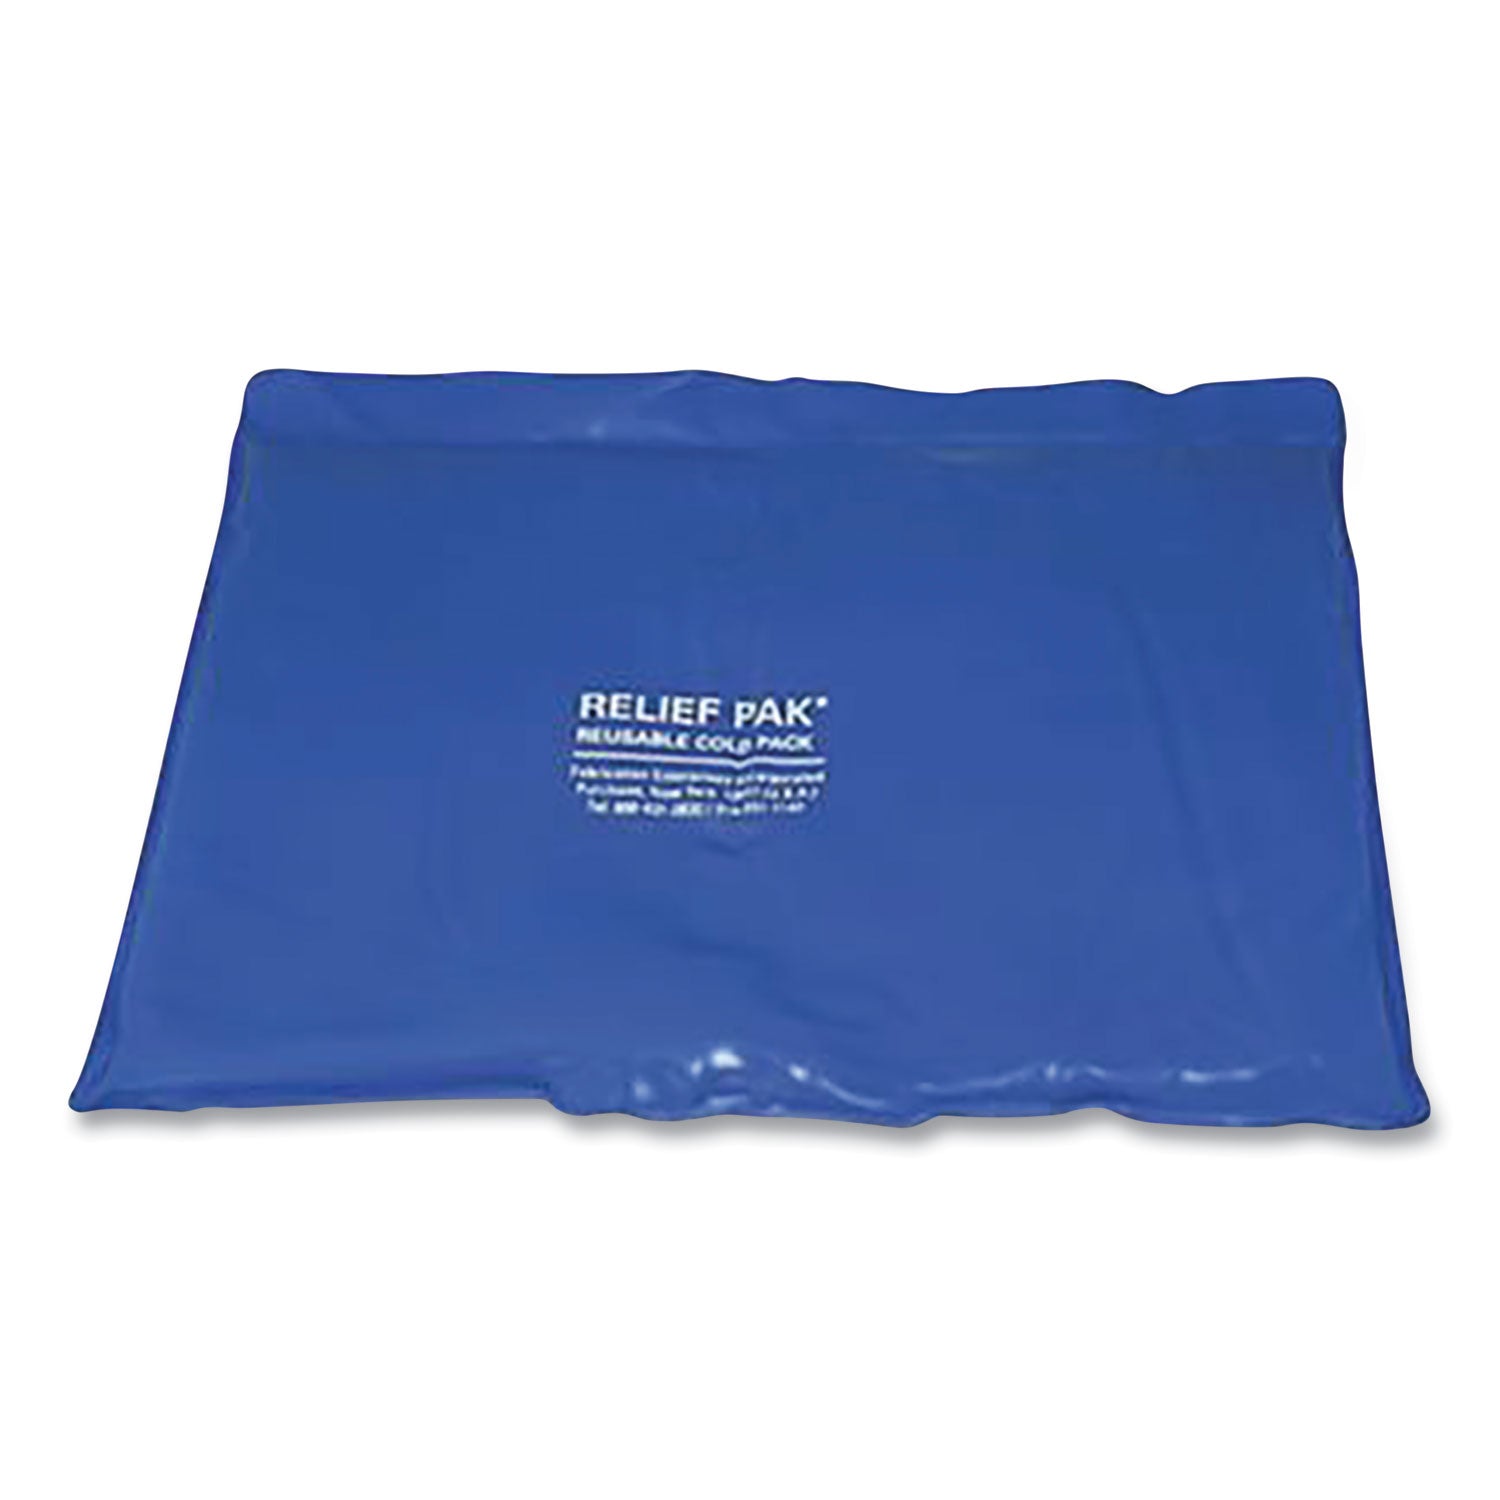 coldspot-reusable-cold-therapy-pack-14-x-11-blue-vinyl_fae111000 - 1